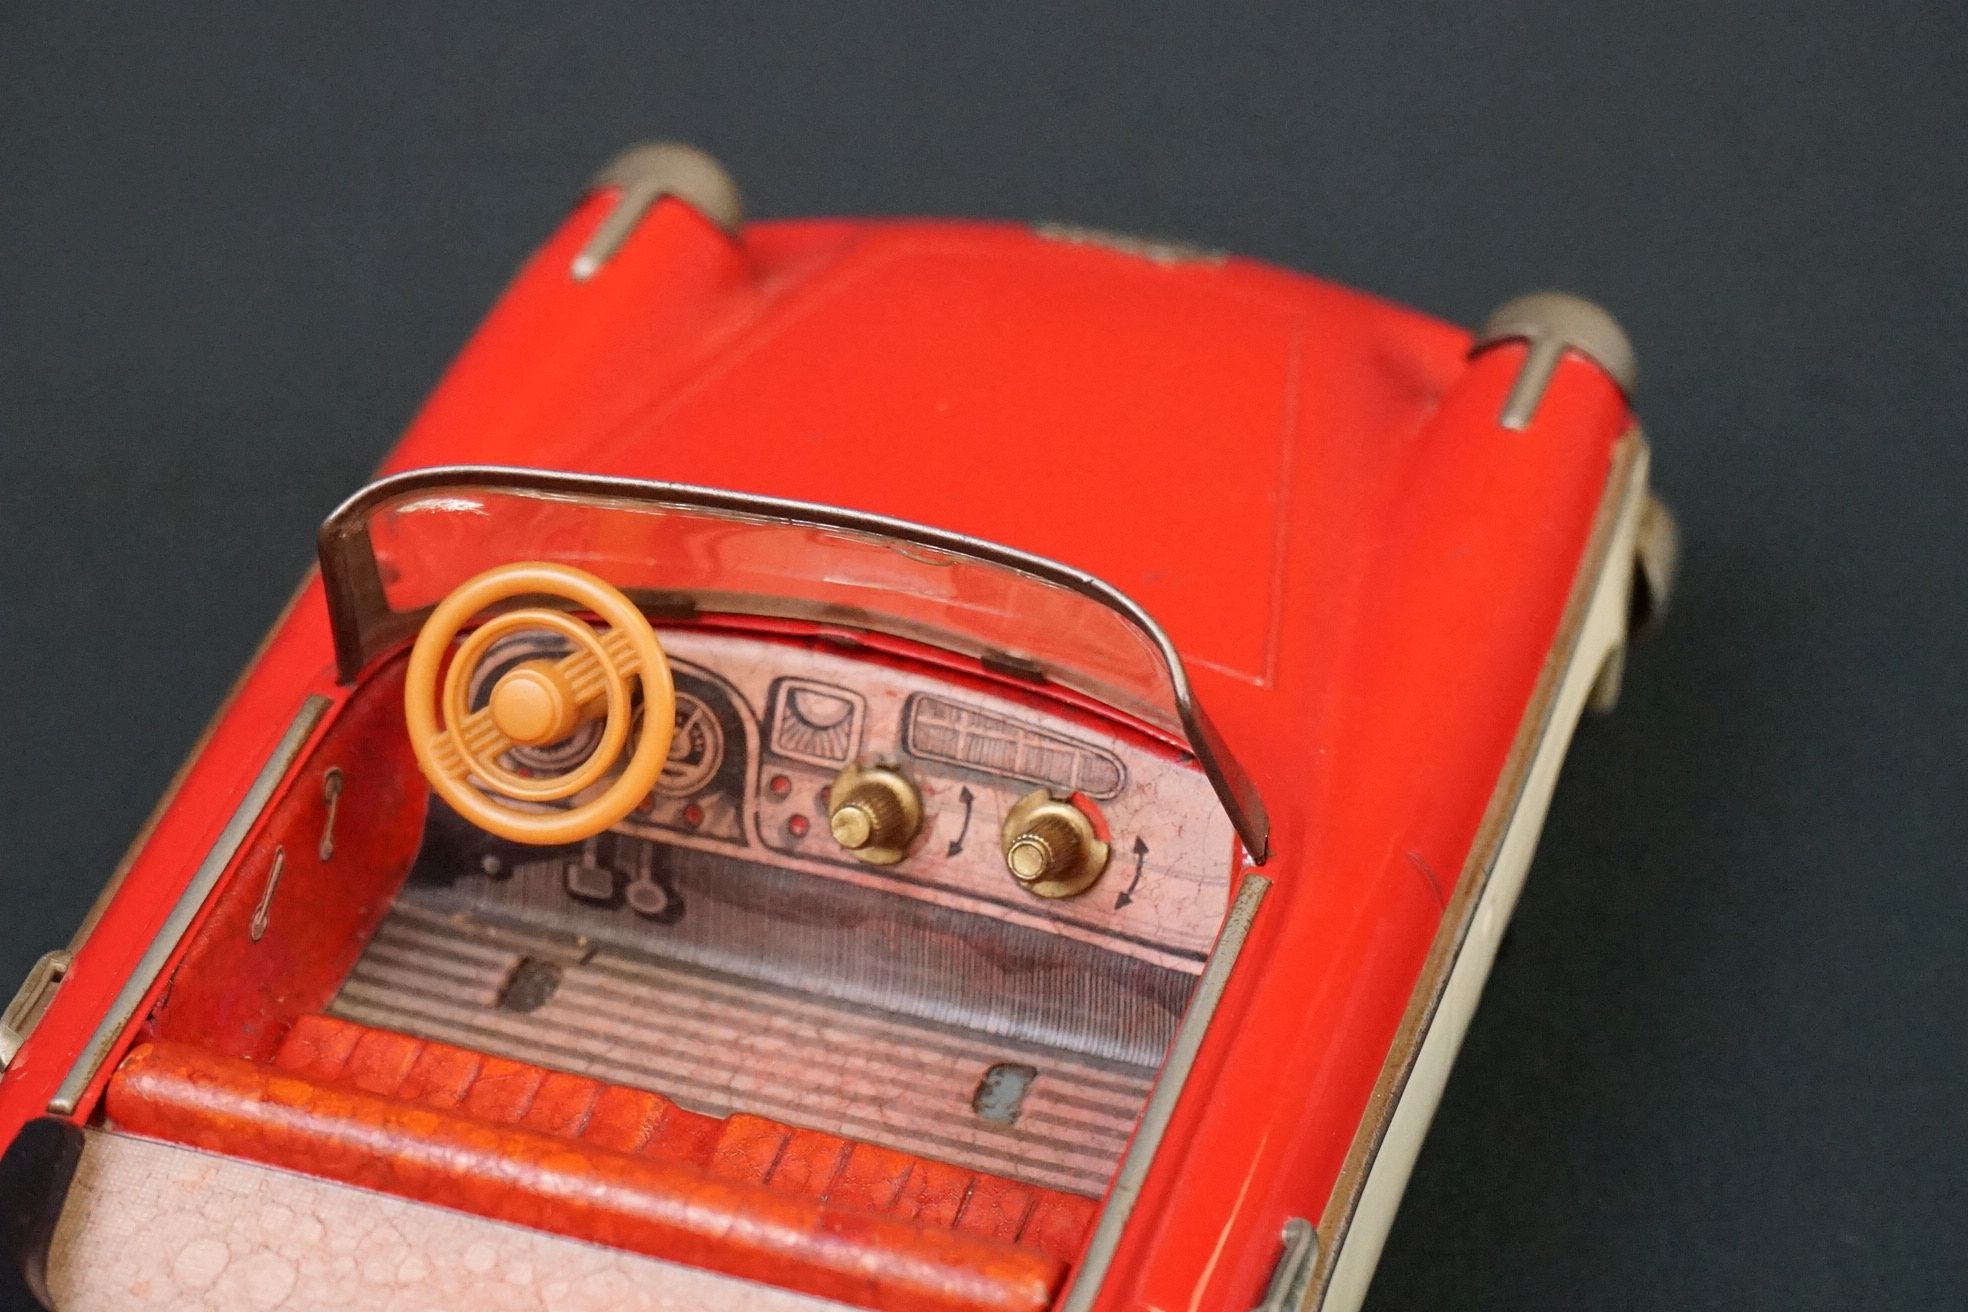 Schuco Elektro Radio 5710 tinplate model in two tone red and white, brown fins, small hole to - Bild 5 aus 11